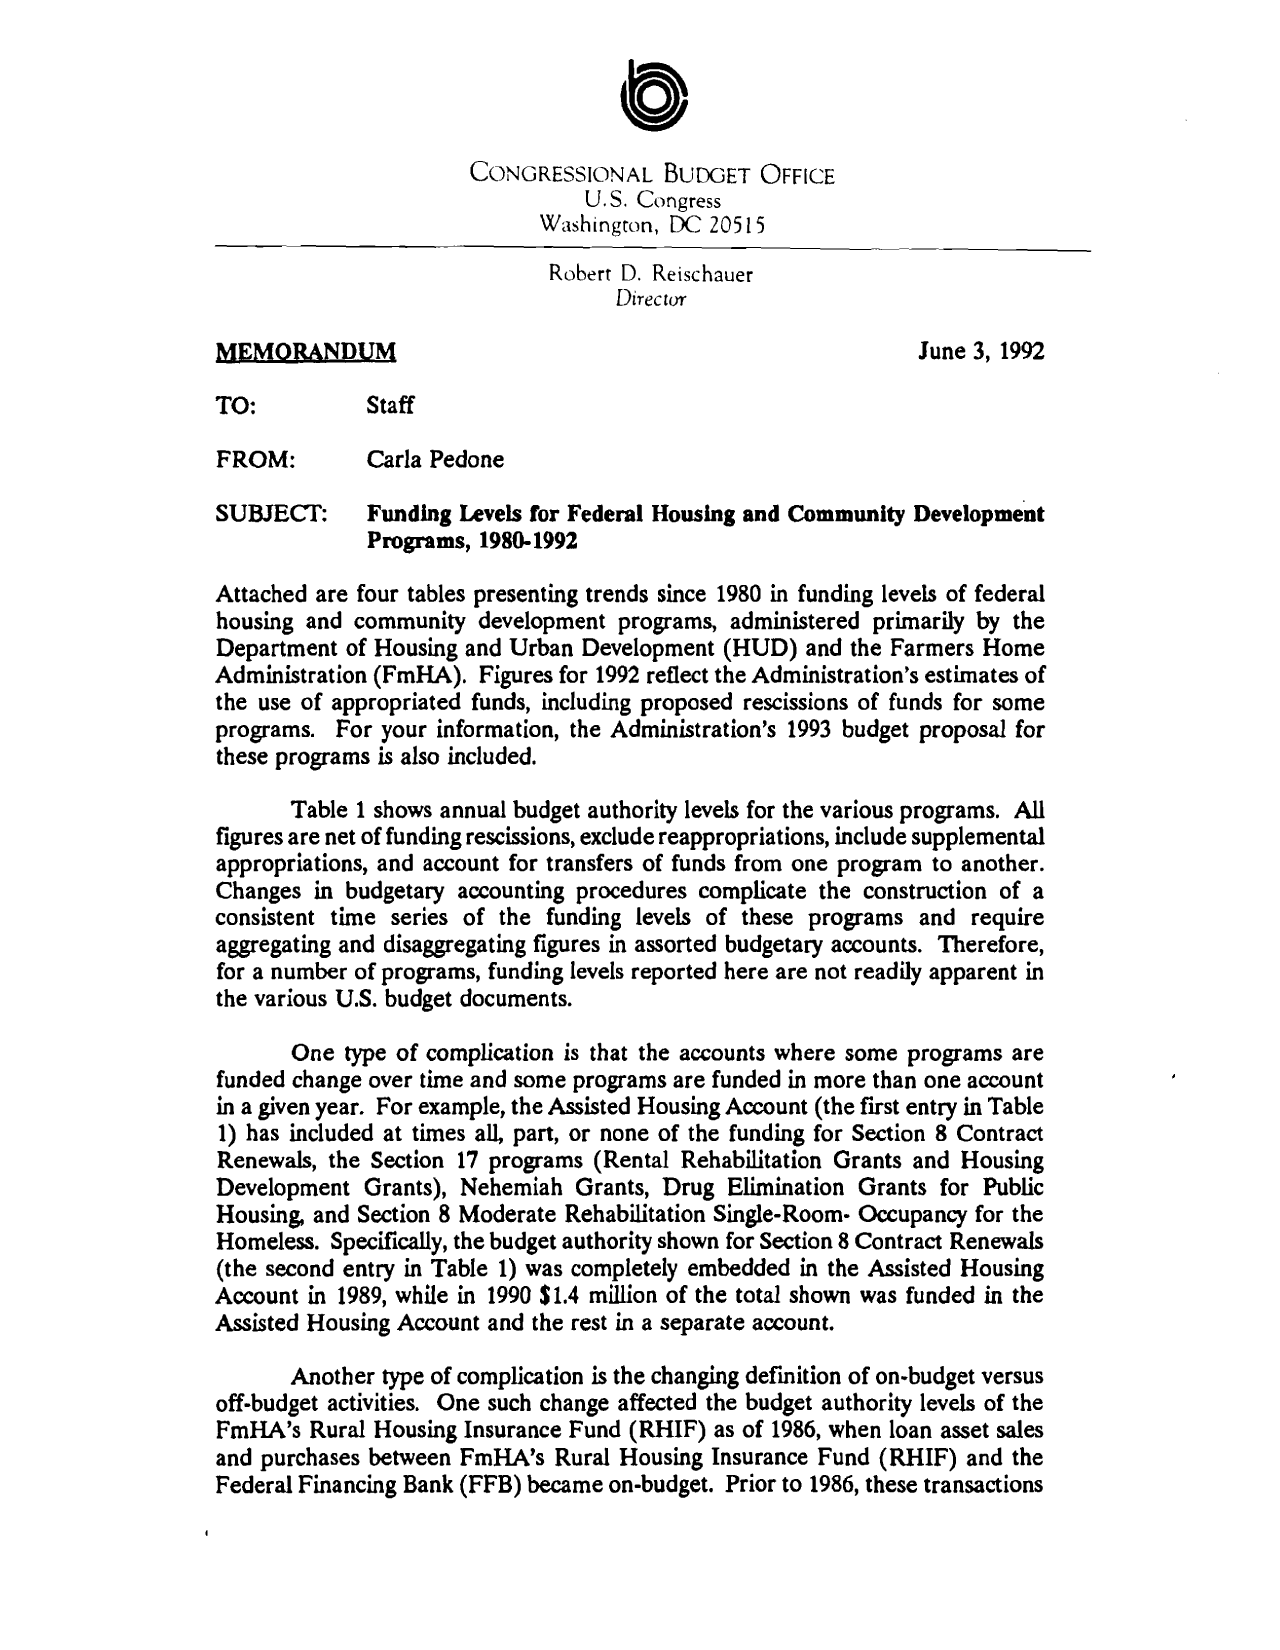 handle is hein.congrec/cbo9412 and id is 1 raw text is: a
CONGRESSIONAL BUDGET OFFICE
U.S. Congress
Washington, DC 20515
Robert D. Reischauer
Director
MEMRANDiUM                                                 June 3, 1992
TO:          Staff
FROM:        Carla Pedone
SUBJECT:     Funding Levels for Federal Housing and Community Development
Programs, 1980-1992
Attached are four tables presenting trends since 1980 in funding levels of federal
housing and community development programs, administered primarily by the
Department of Housing and Urban Development (HUD) and the Farmers Home
Administration (FmHA). Figures for 1992 reflect the Administration's estimates of
the use of appropriated funds, including proposed rescissions of funds for some
programs. For your information, the Administration's 1993 budget proposal for
these programs is also included.
Table 1 shows annual budget authority levels for the various programs. All
figures are net of funding rescissions, exclude reappropriations, include supplemental
appropriations, and account for transfers of funds from one program to another.
Changes in budgetary accounting procedures complicate the construction of a
consistent time series of the funding levels of these programs and require
aggregating and disaggregating figures in assorted budgetary accounts. Therefore,
for a number of programs, funding levels reported here are not readily apparent in
the various U.S. budget documents.
One type of complication is that the accounts where some programs are
funded change over time and some programs are funded in more than one account
in a given year. For example, the Assisted Housing Account (the first entry in Table
1) has included at times all, part, or none of the funding for Section 8 Contract
Renewals, the Section 17 programs (Rental Rehabilitation Grants and Housing
Development Grants), Nehemiah Grants, Drug Elimination Grants for Public
Housing, and Section 8 Moderate Rehabilitation Single-Room- Occupancy for the
Homeless. Specifically, the budget authority shown for Section 8 Contract Renewals
(the second entry in Table 1) was completely embedded in the Assisted Housing
Account in 1989, while in 1990 $1.4 million of the total shown was funded in the
Assisted Housing Account and the rest in a separate account.
Another type of complication is the changing definition of on-budget versus
off-budget activities. One such change affected the budget authority levels of the
FmHA's Rural Housing Insurance Fund (RHIF) as of 1986, when loan asset sales

and purchases between FmHA's Rural Housing Insurance Fund (RHIF) and the
Federal Financing Bank (FFB) became on-budget. Prior to 1986, these transactions


